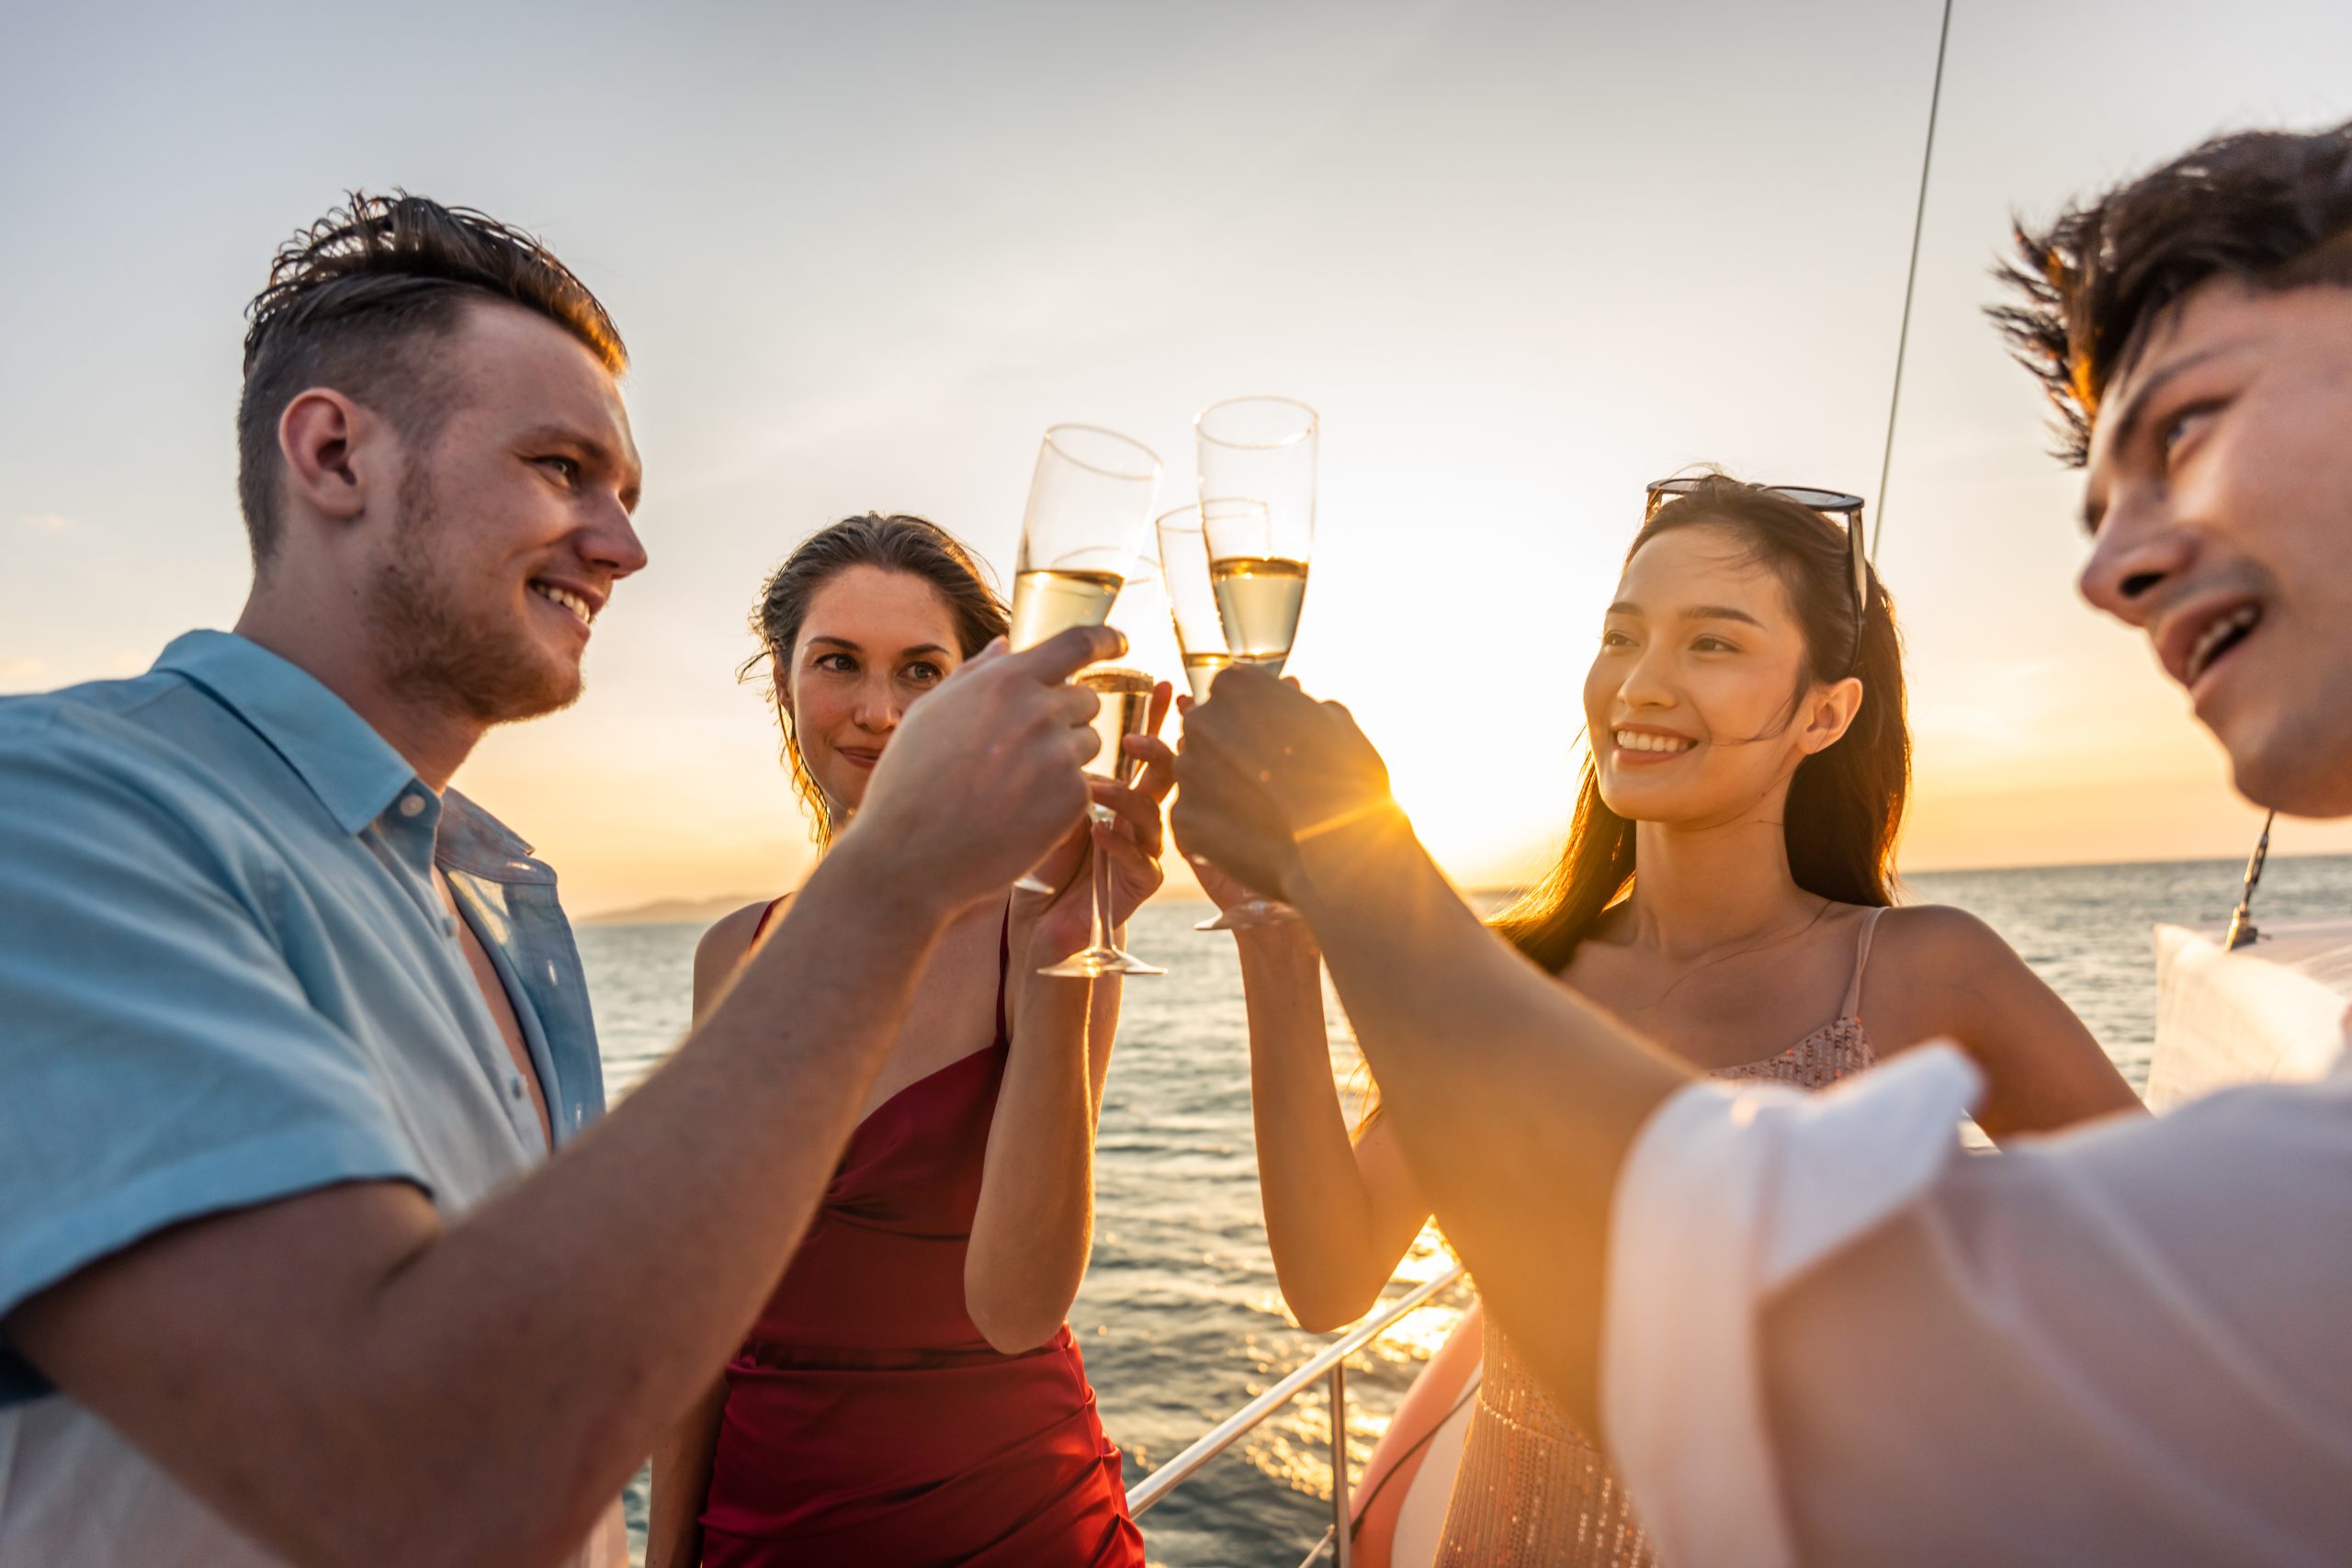 Group of diverse friends drink champagne while having a party in yacht. Attractive young men and women hanging out, celebrating holiday vacation trip while catamaran boat sailing during summer sunset.